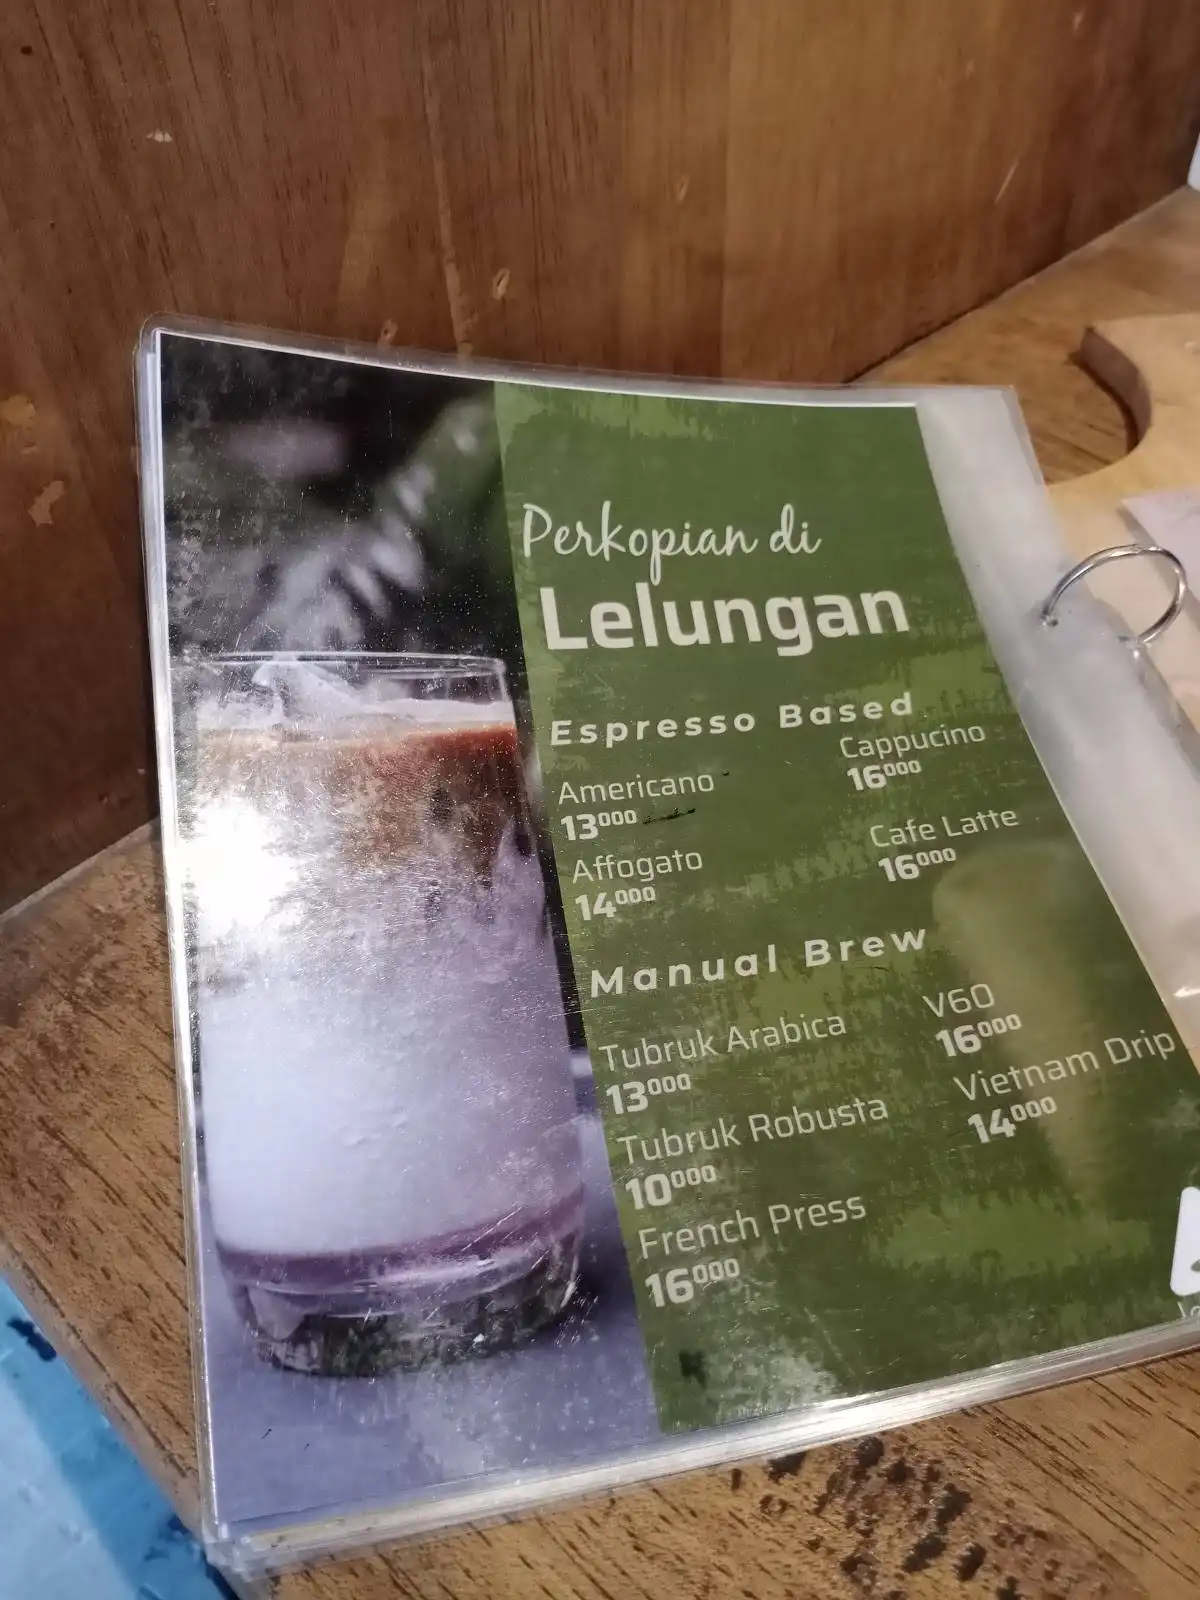 Lelungan Coffee and Eatery